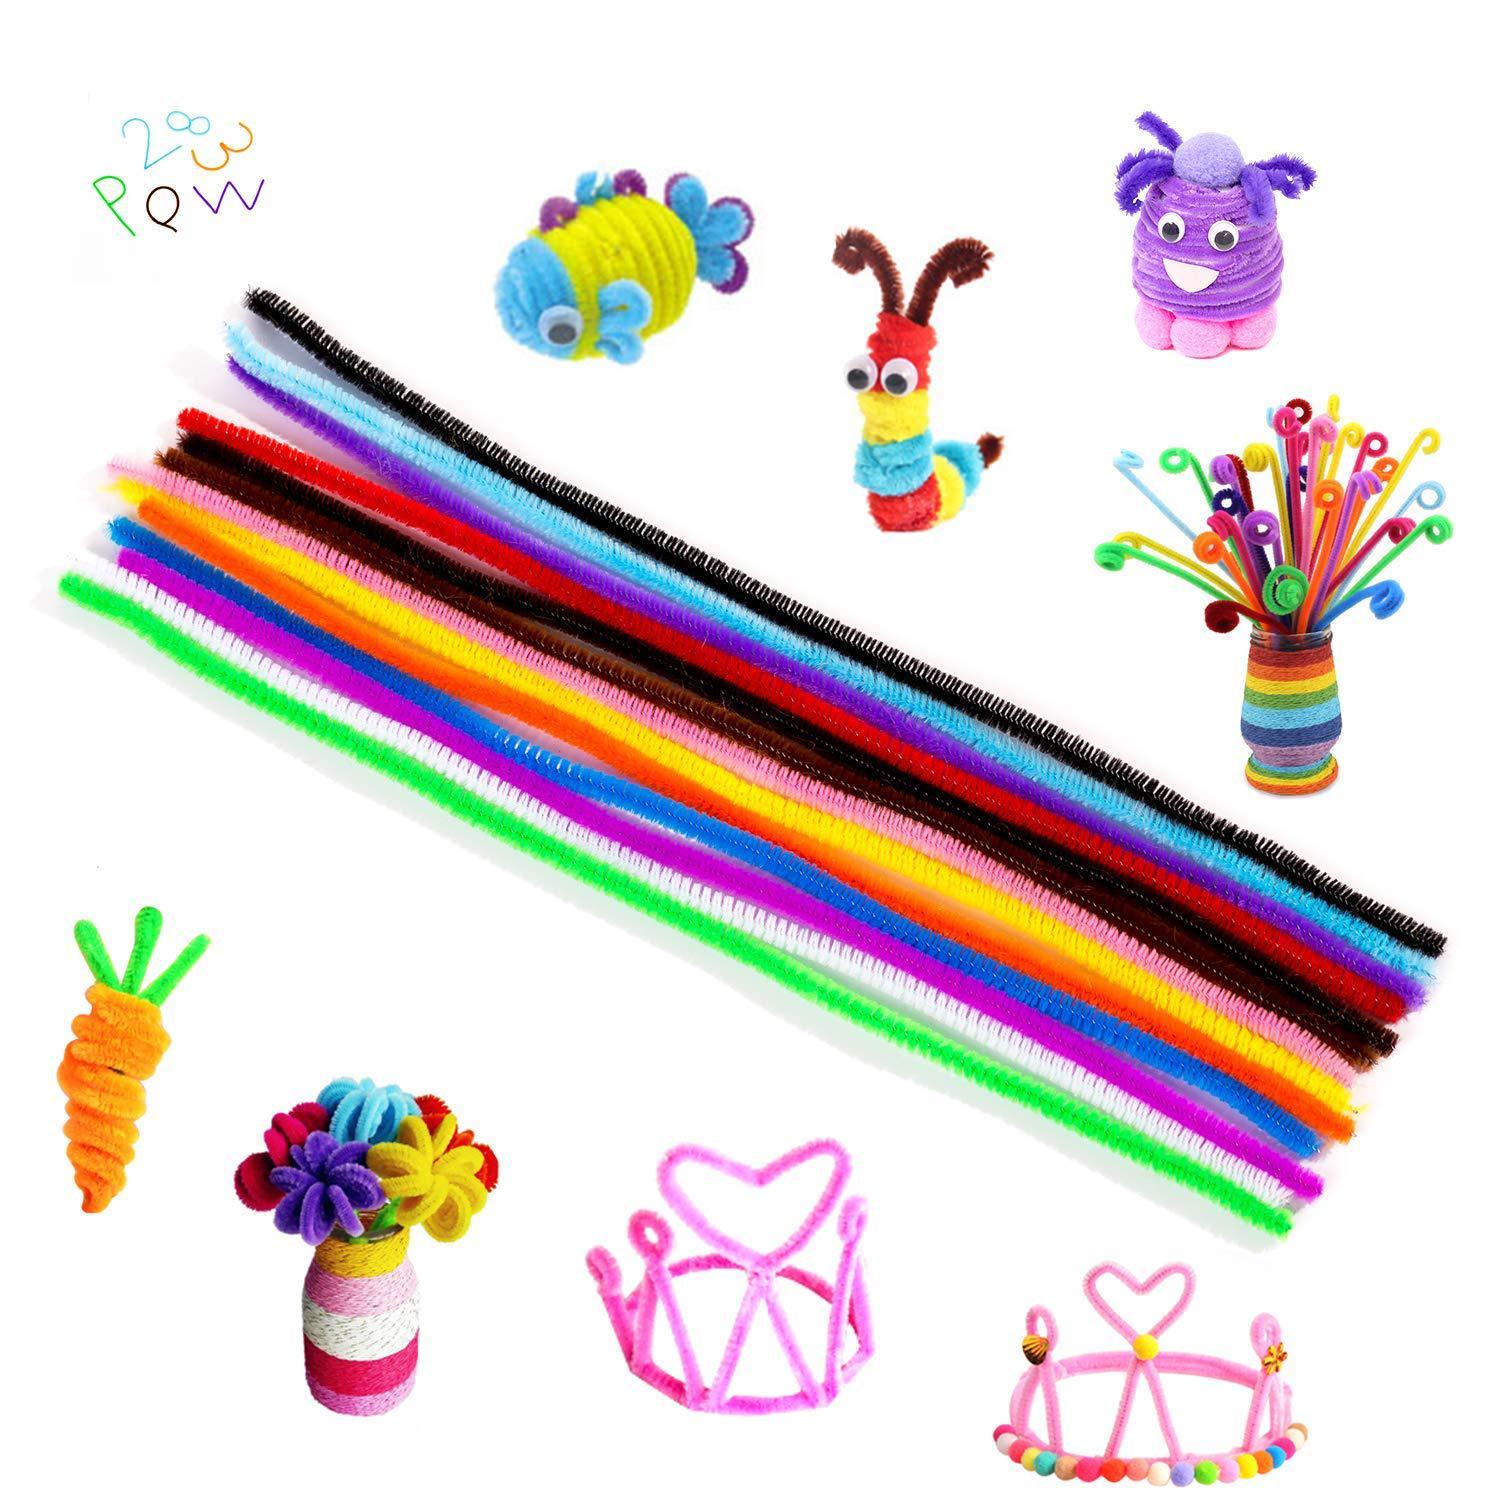 CRAFTUS 200Pcs Pipe Cleaners 20 Assorted Colors, 12 inch Long Fuzzy Craft  Pipe Cleaners for DIY Art & Craft Supplies, Chenille Stems for Kids  Creative